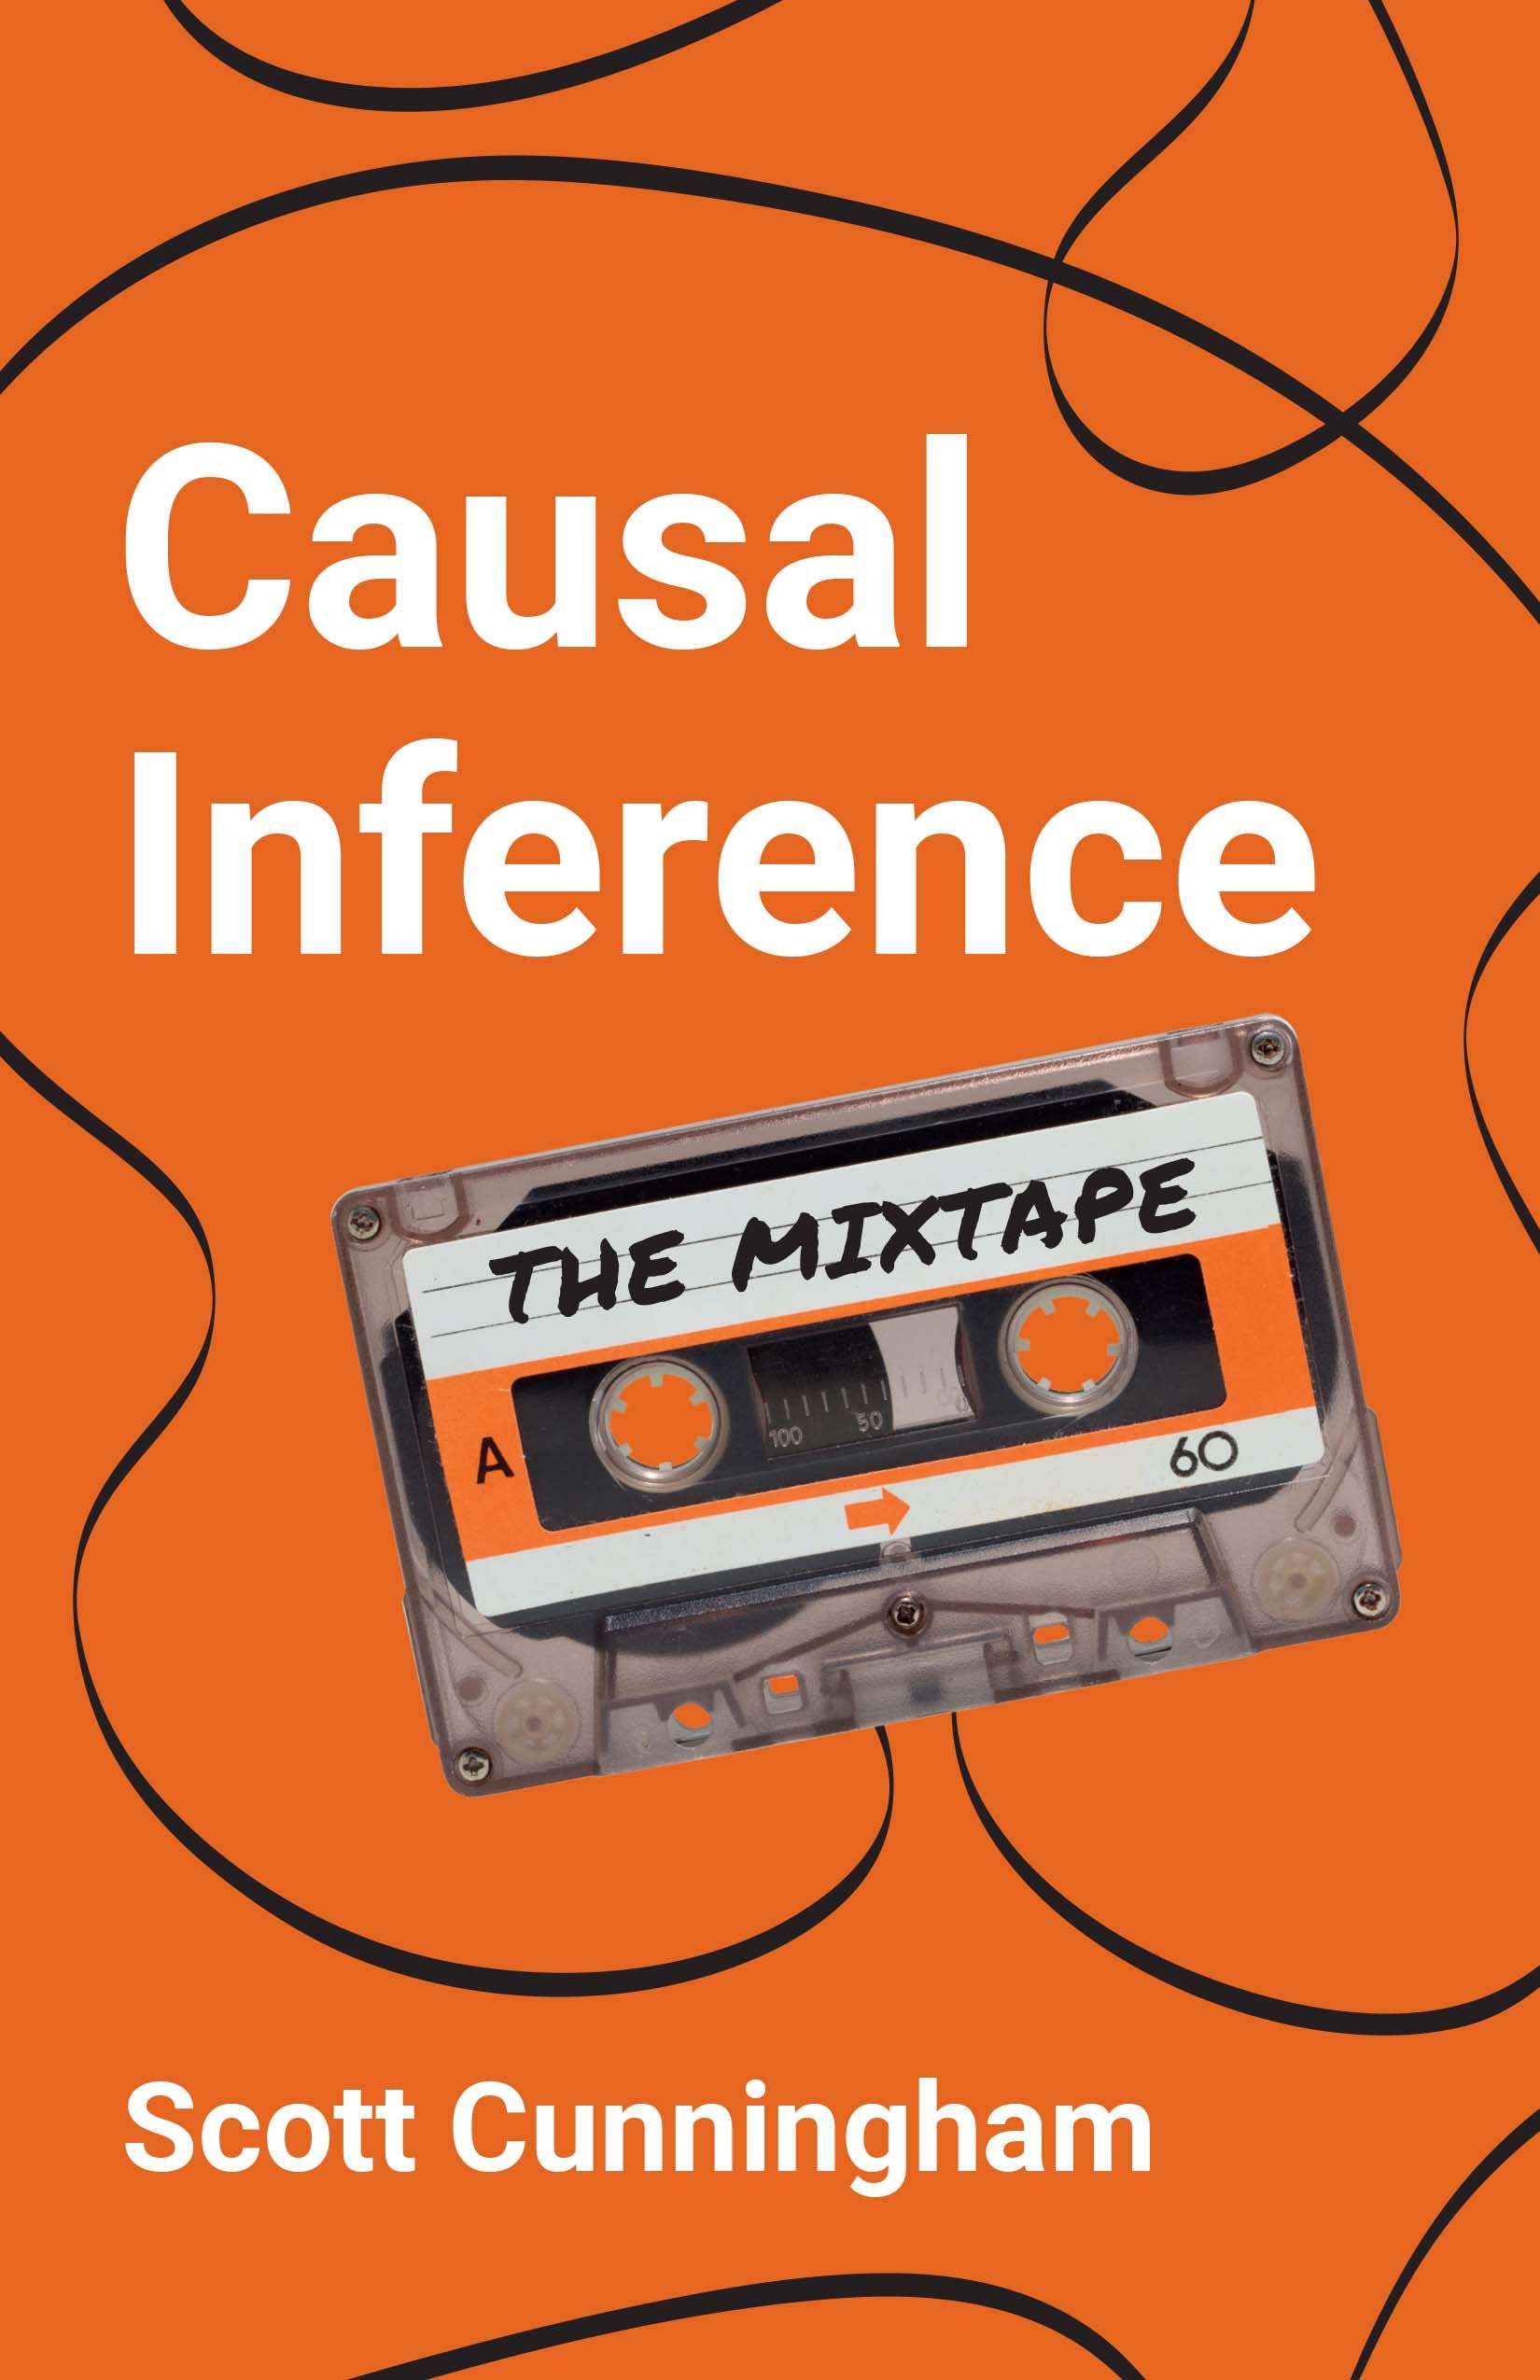 Causal Inference Mixtape